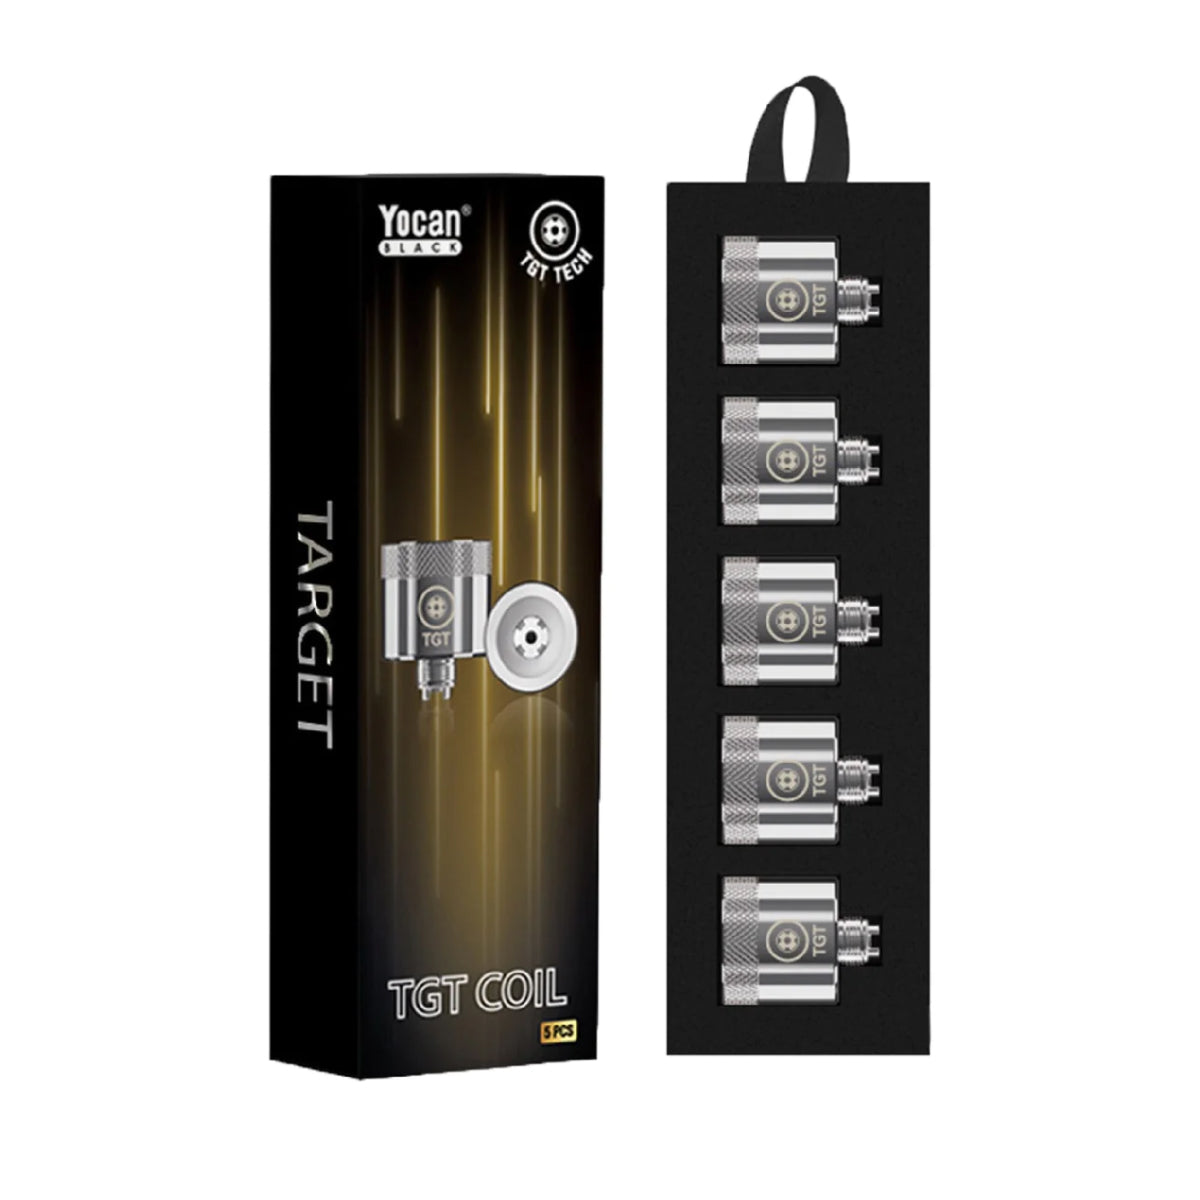 Yocan Black TGT Replacement Coil - 5 Pack